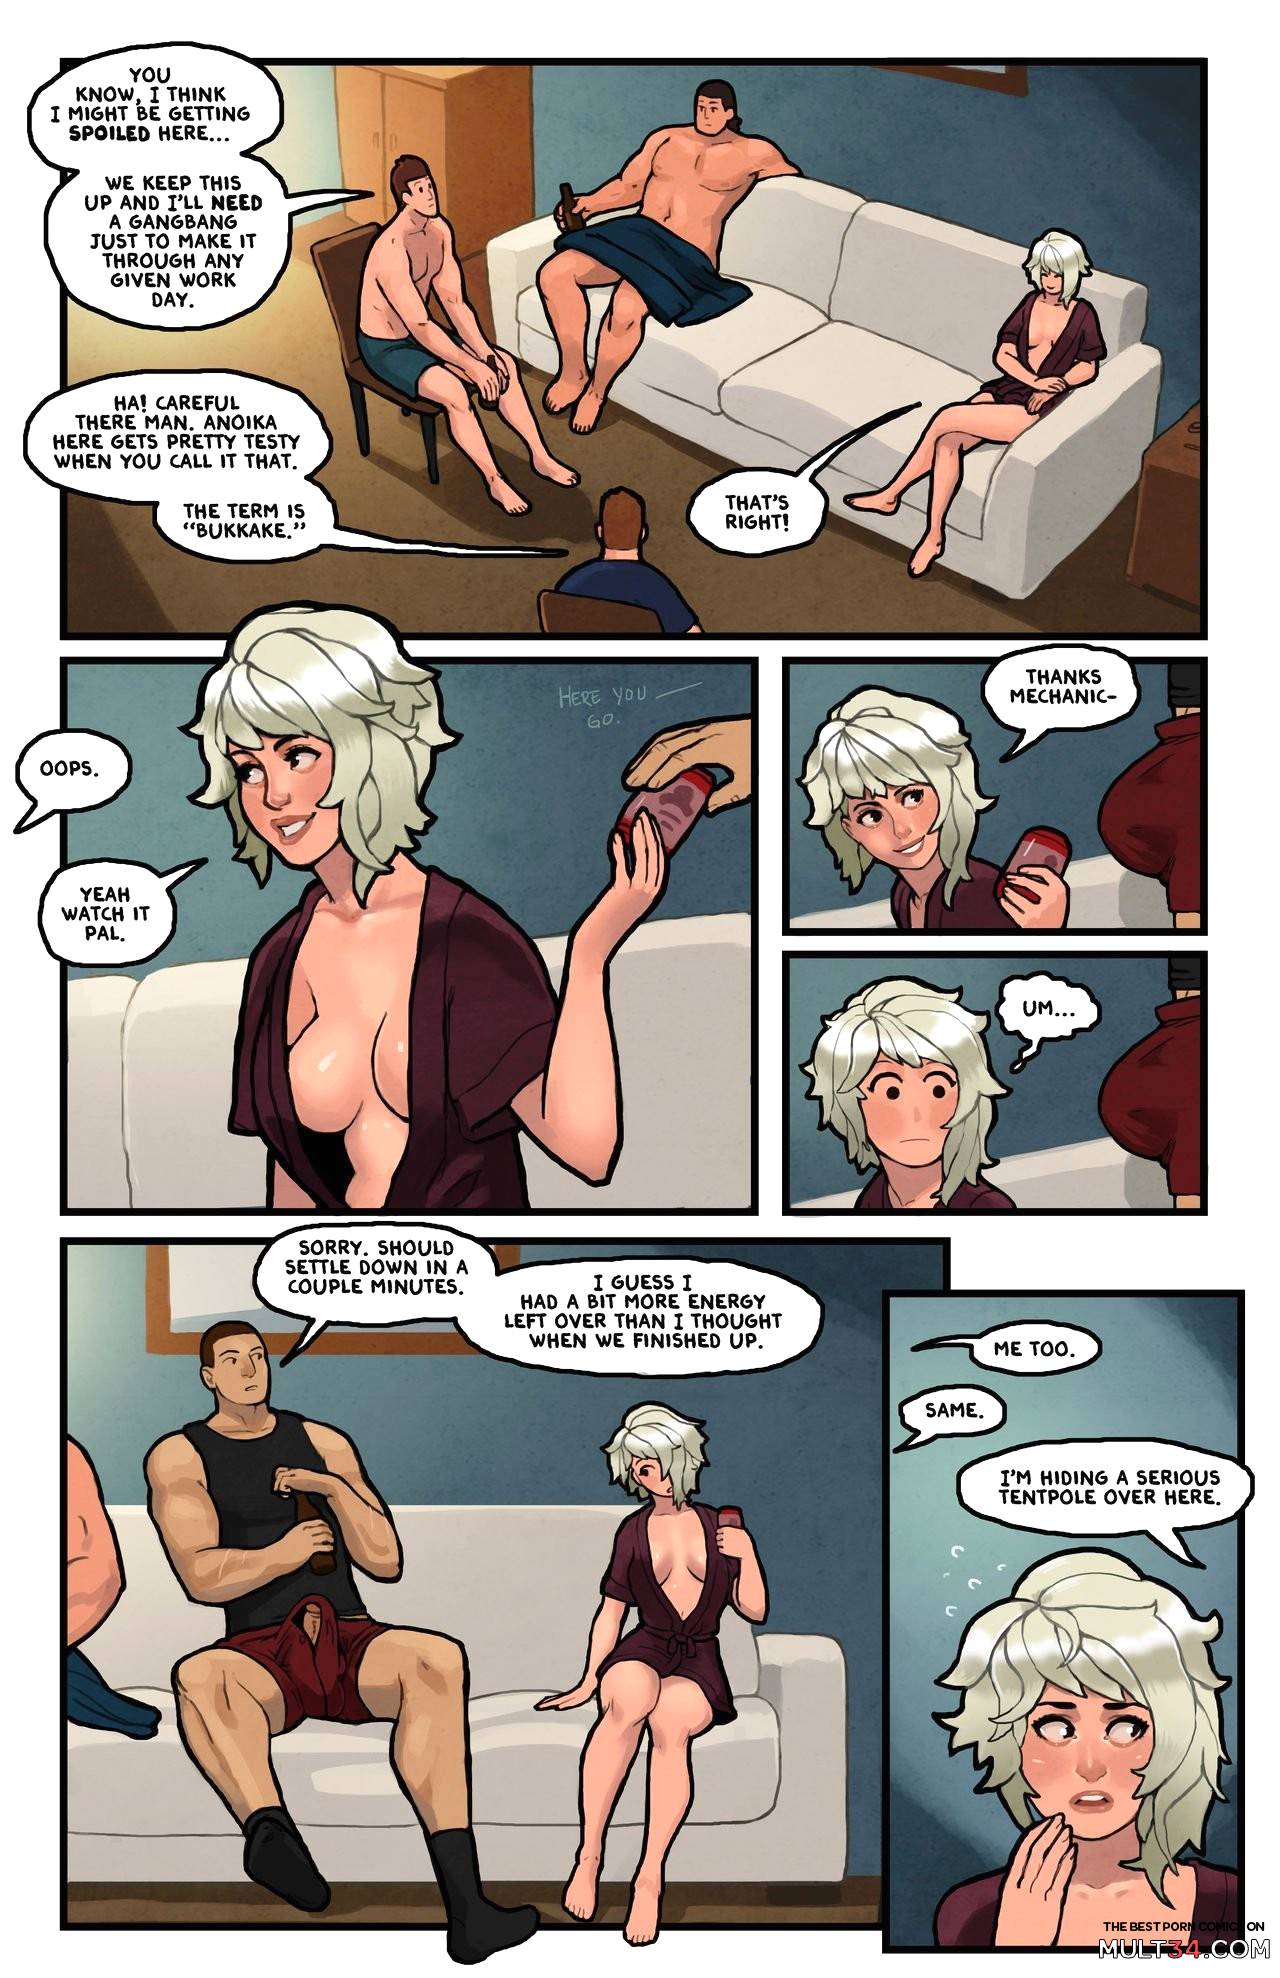 This Romantic World 6 page 5